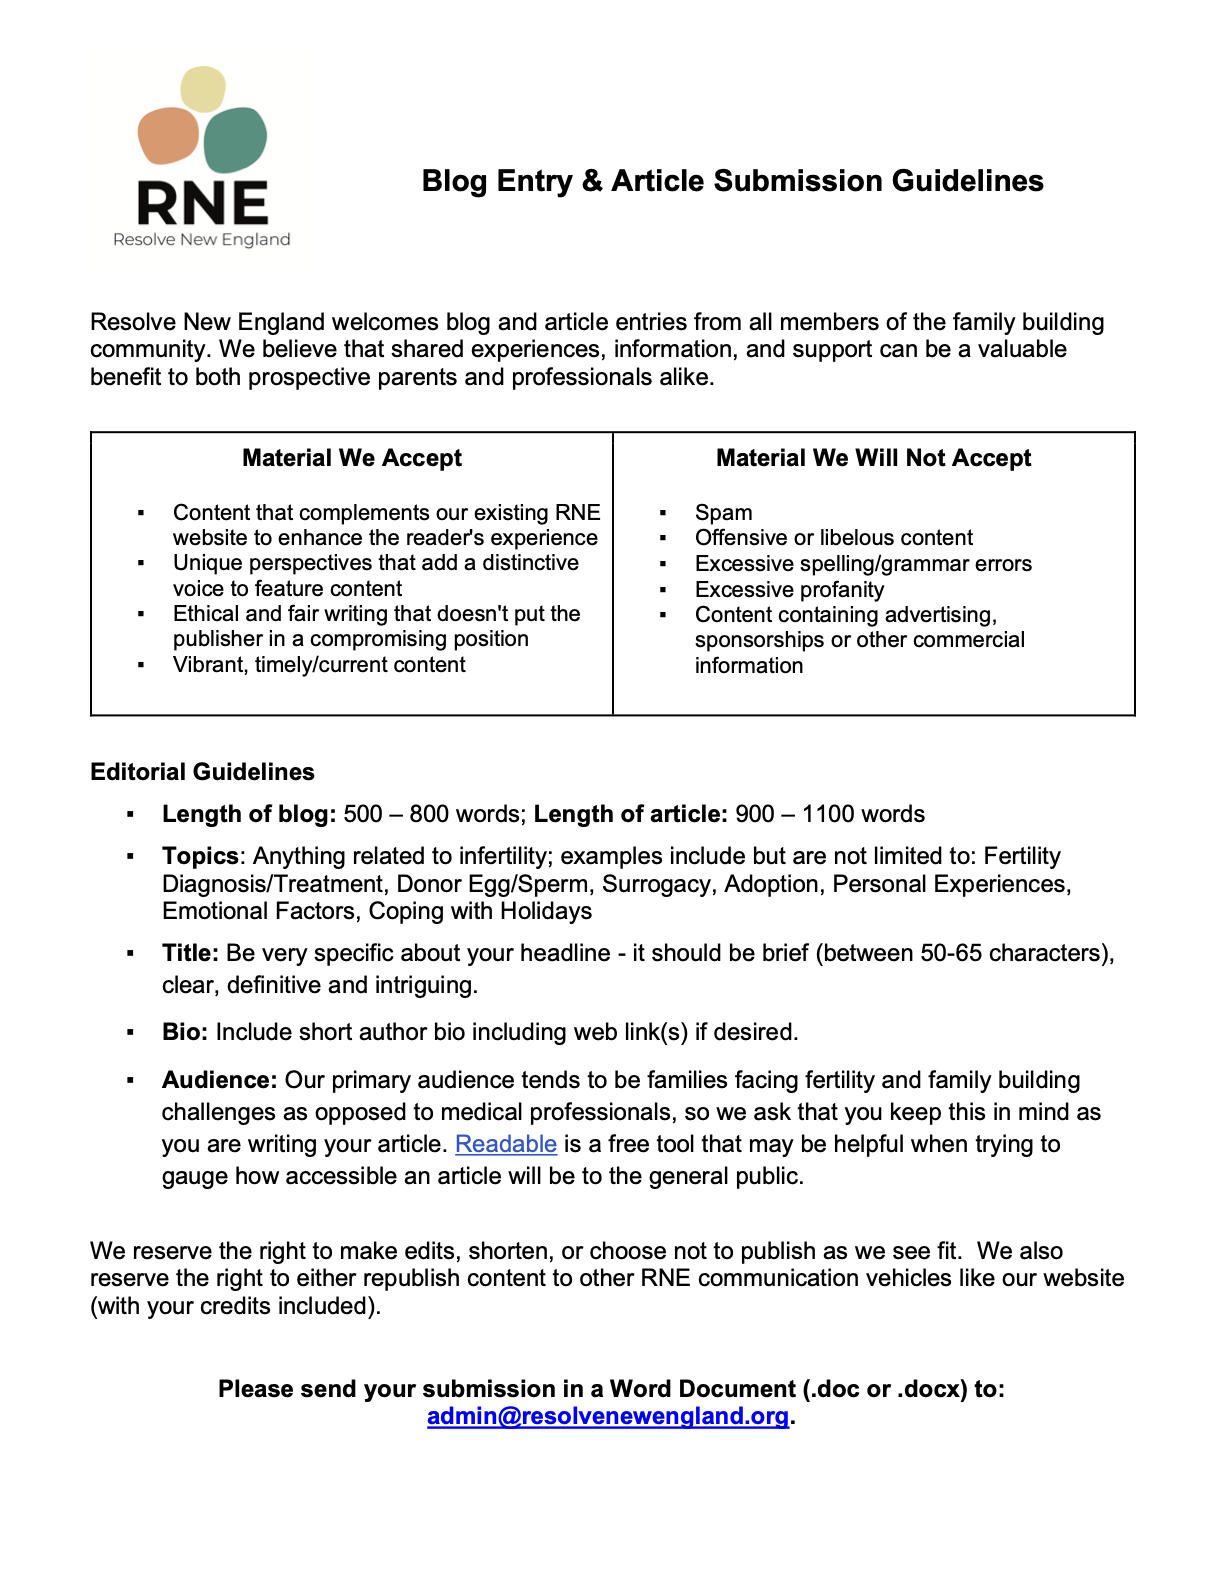 RNE Blog & Article Submission Guidelines